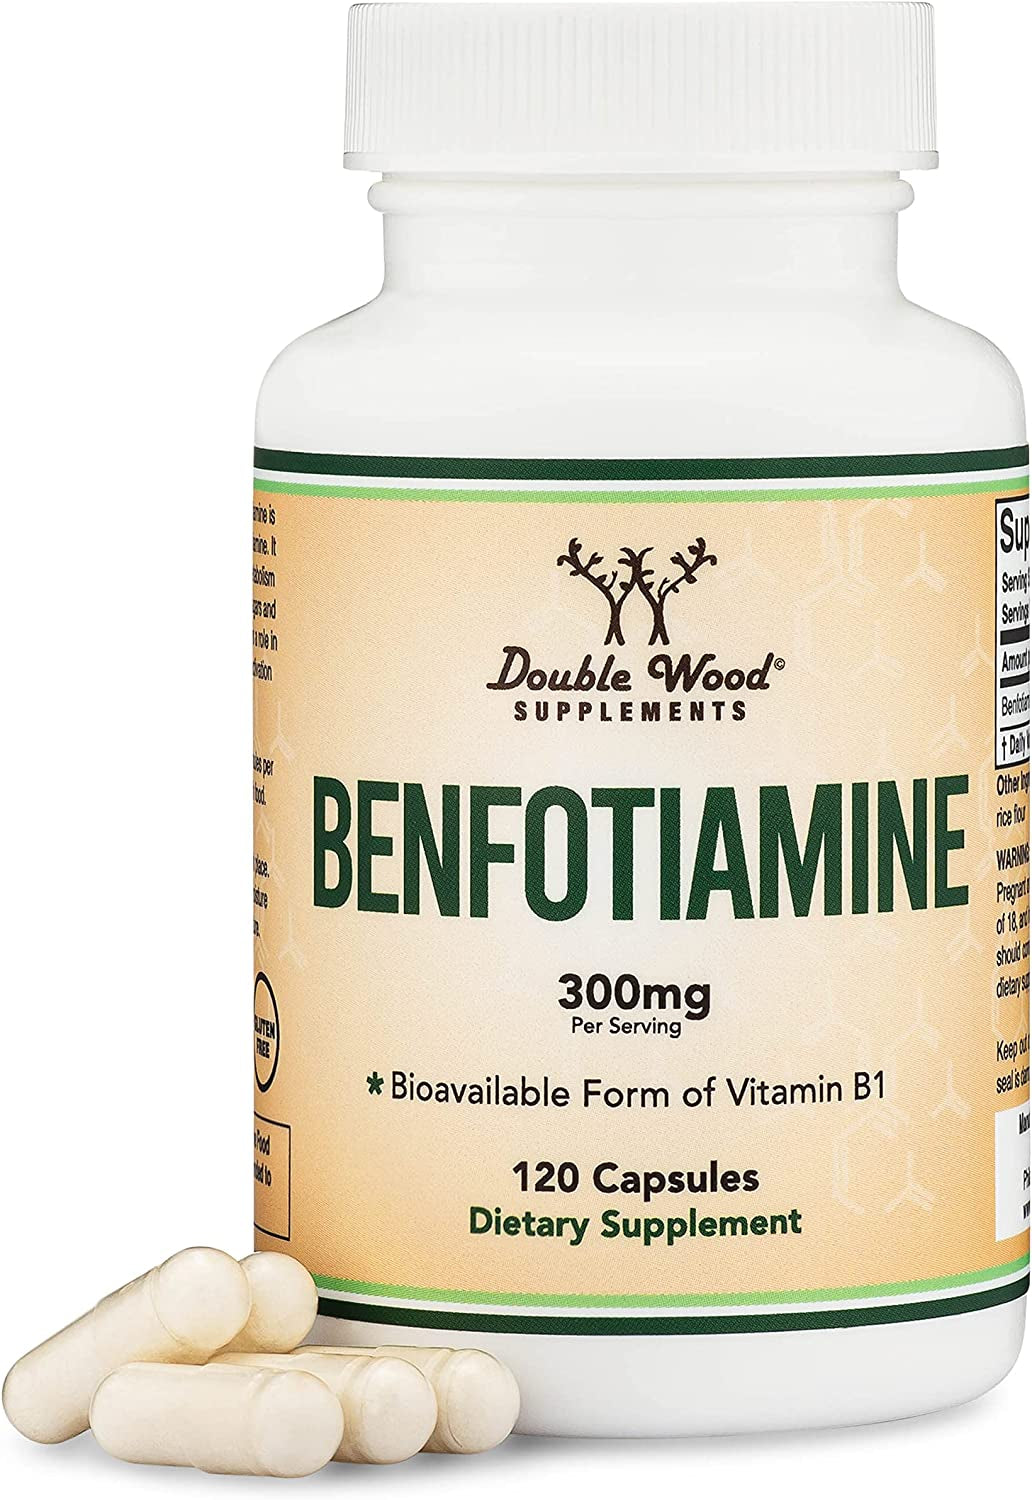 Benfotiamine 300Mg (Third Party Tested, 120 Capsules) Made in the USA, to Boost Thiamine Levels (More Absorbable than Thiamine) by